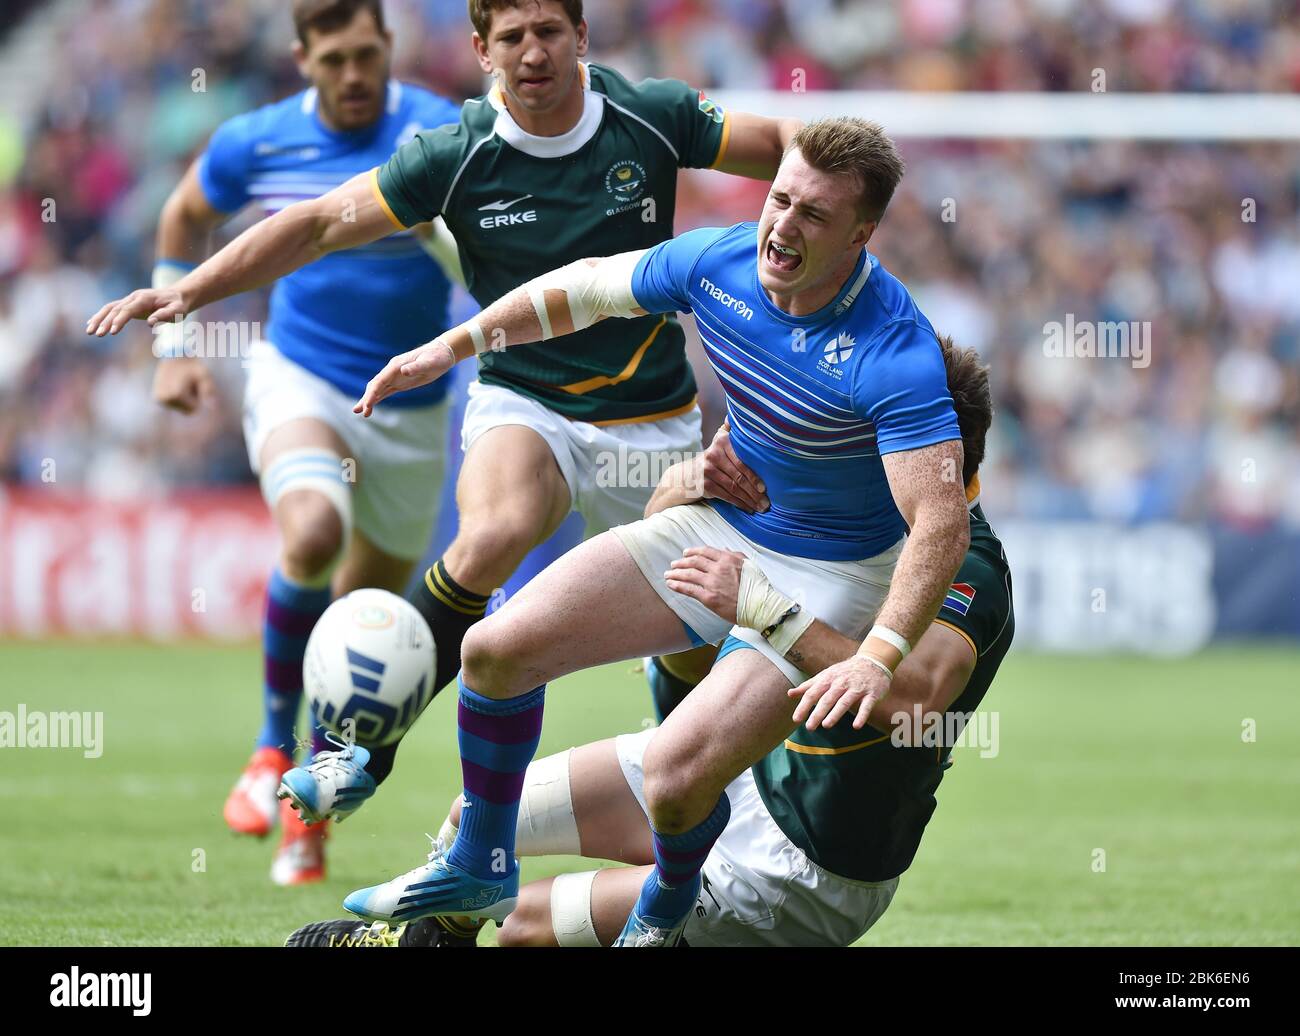 Scotland's Stuart Hogg is tackled by South Africa's Warren Whiteley during the quarter final tie. 2014 Commonwealth Games, Ibrox Stadium, Glasgow. Stock Photo